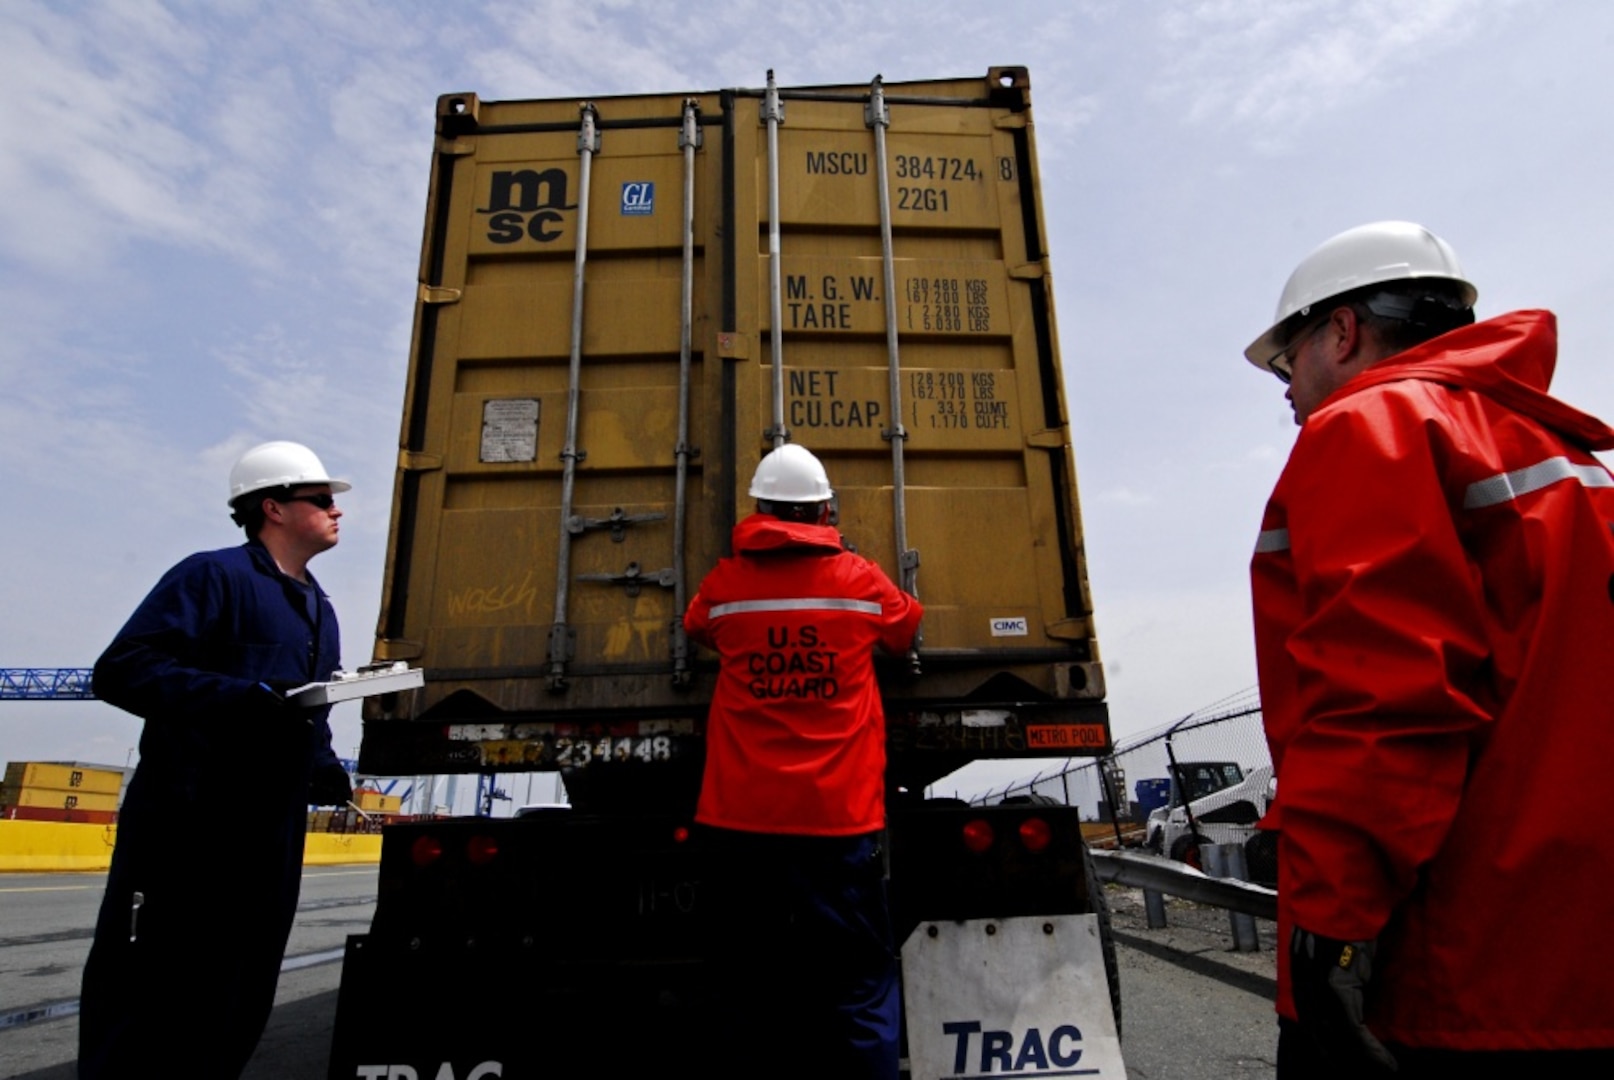 A team of Coast Guard Marine Science Technicians inspect a shipping container on the back of a truck at Conley Terminal in Boston. (U.S. Coast Guard photo by Petty Officer Second Class Luke Pinneo)